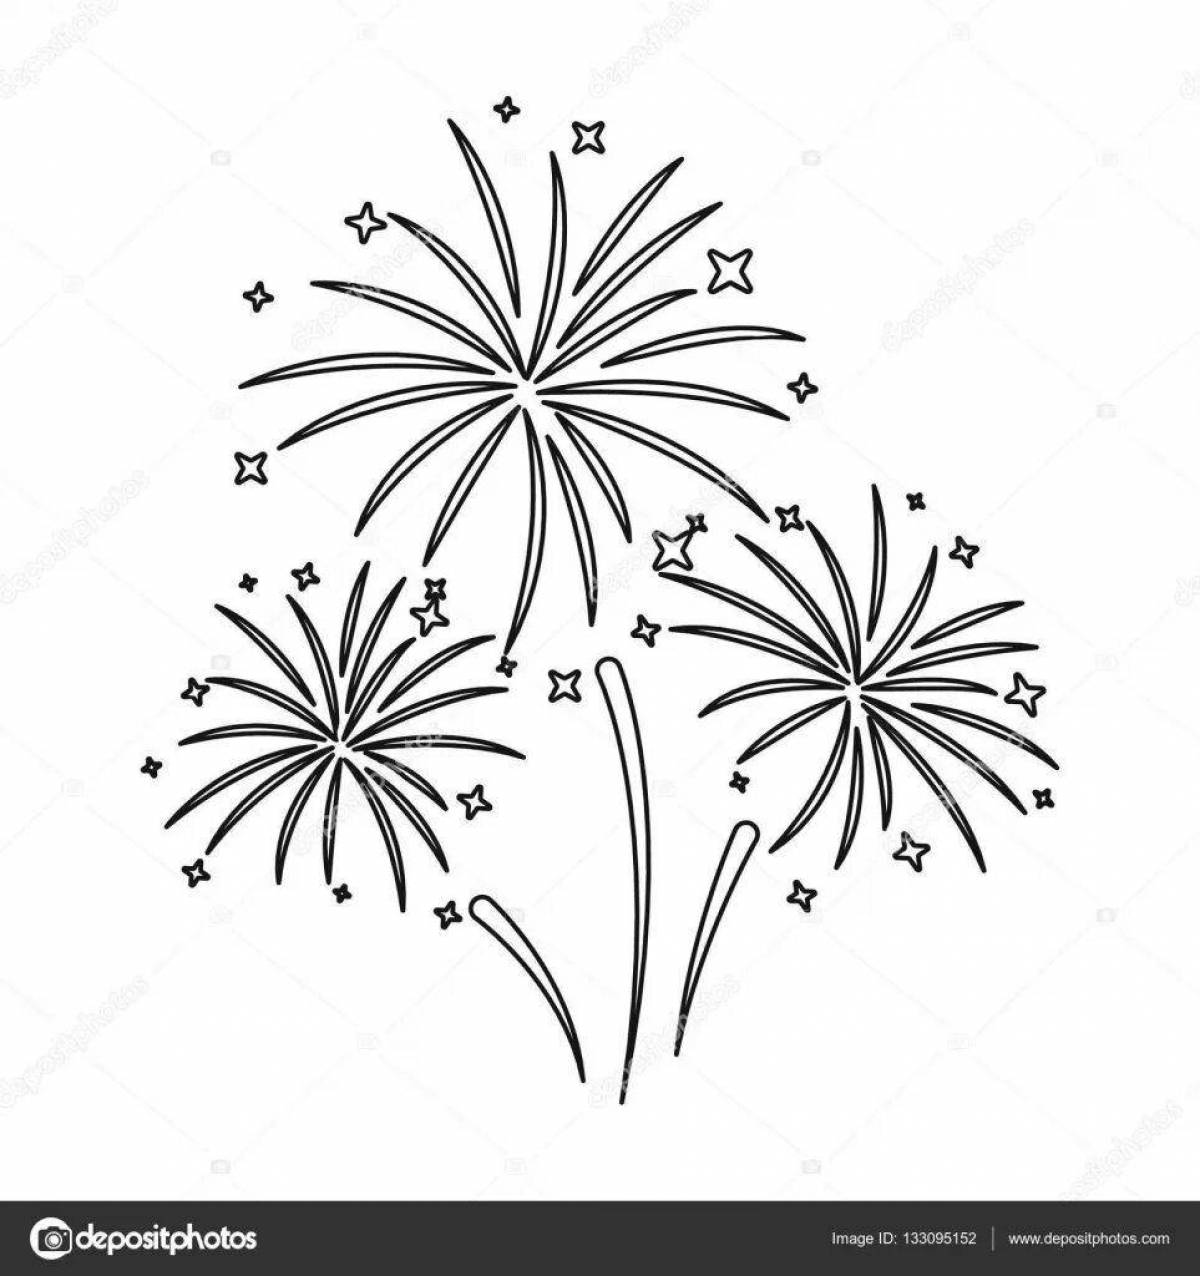 A fascinating fireworks coloring book for children 3-4 years old